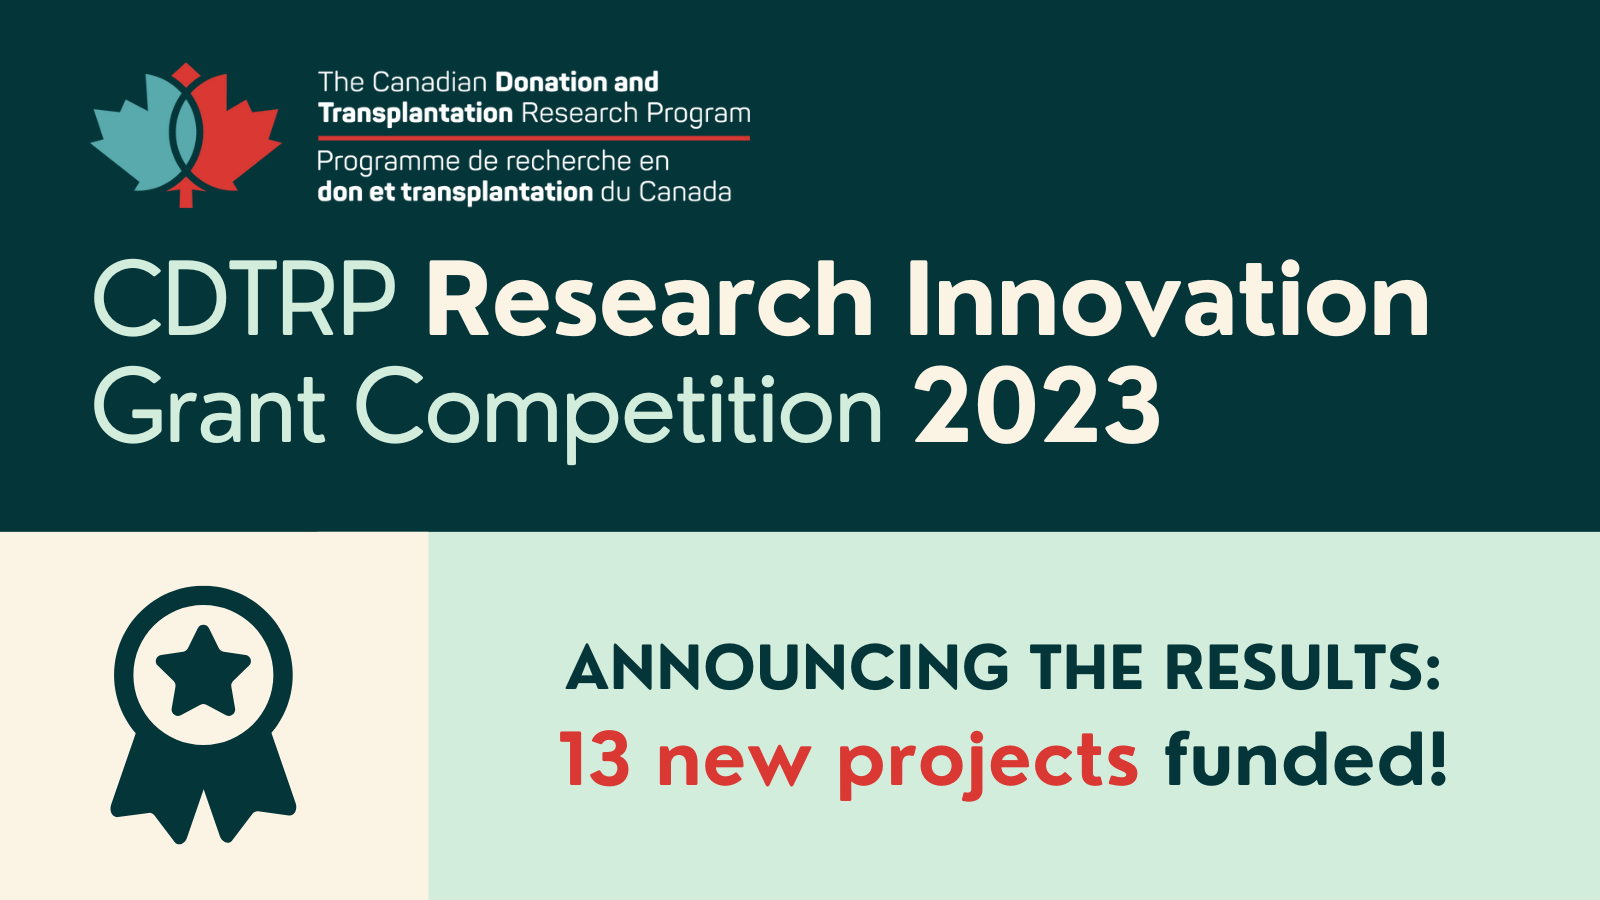 Announcing the results of the 2023 CDTRP Research Innovation Grant Competition – 13 new projects funded! image